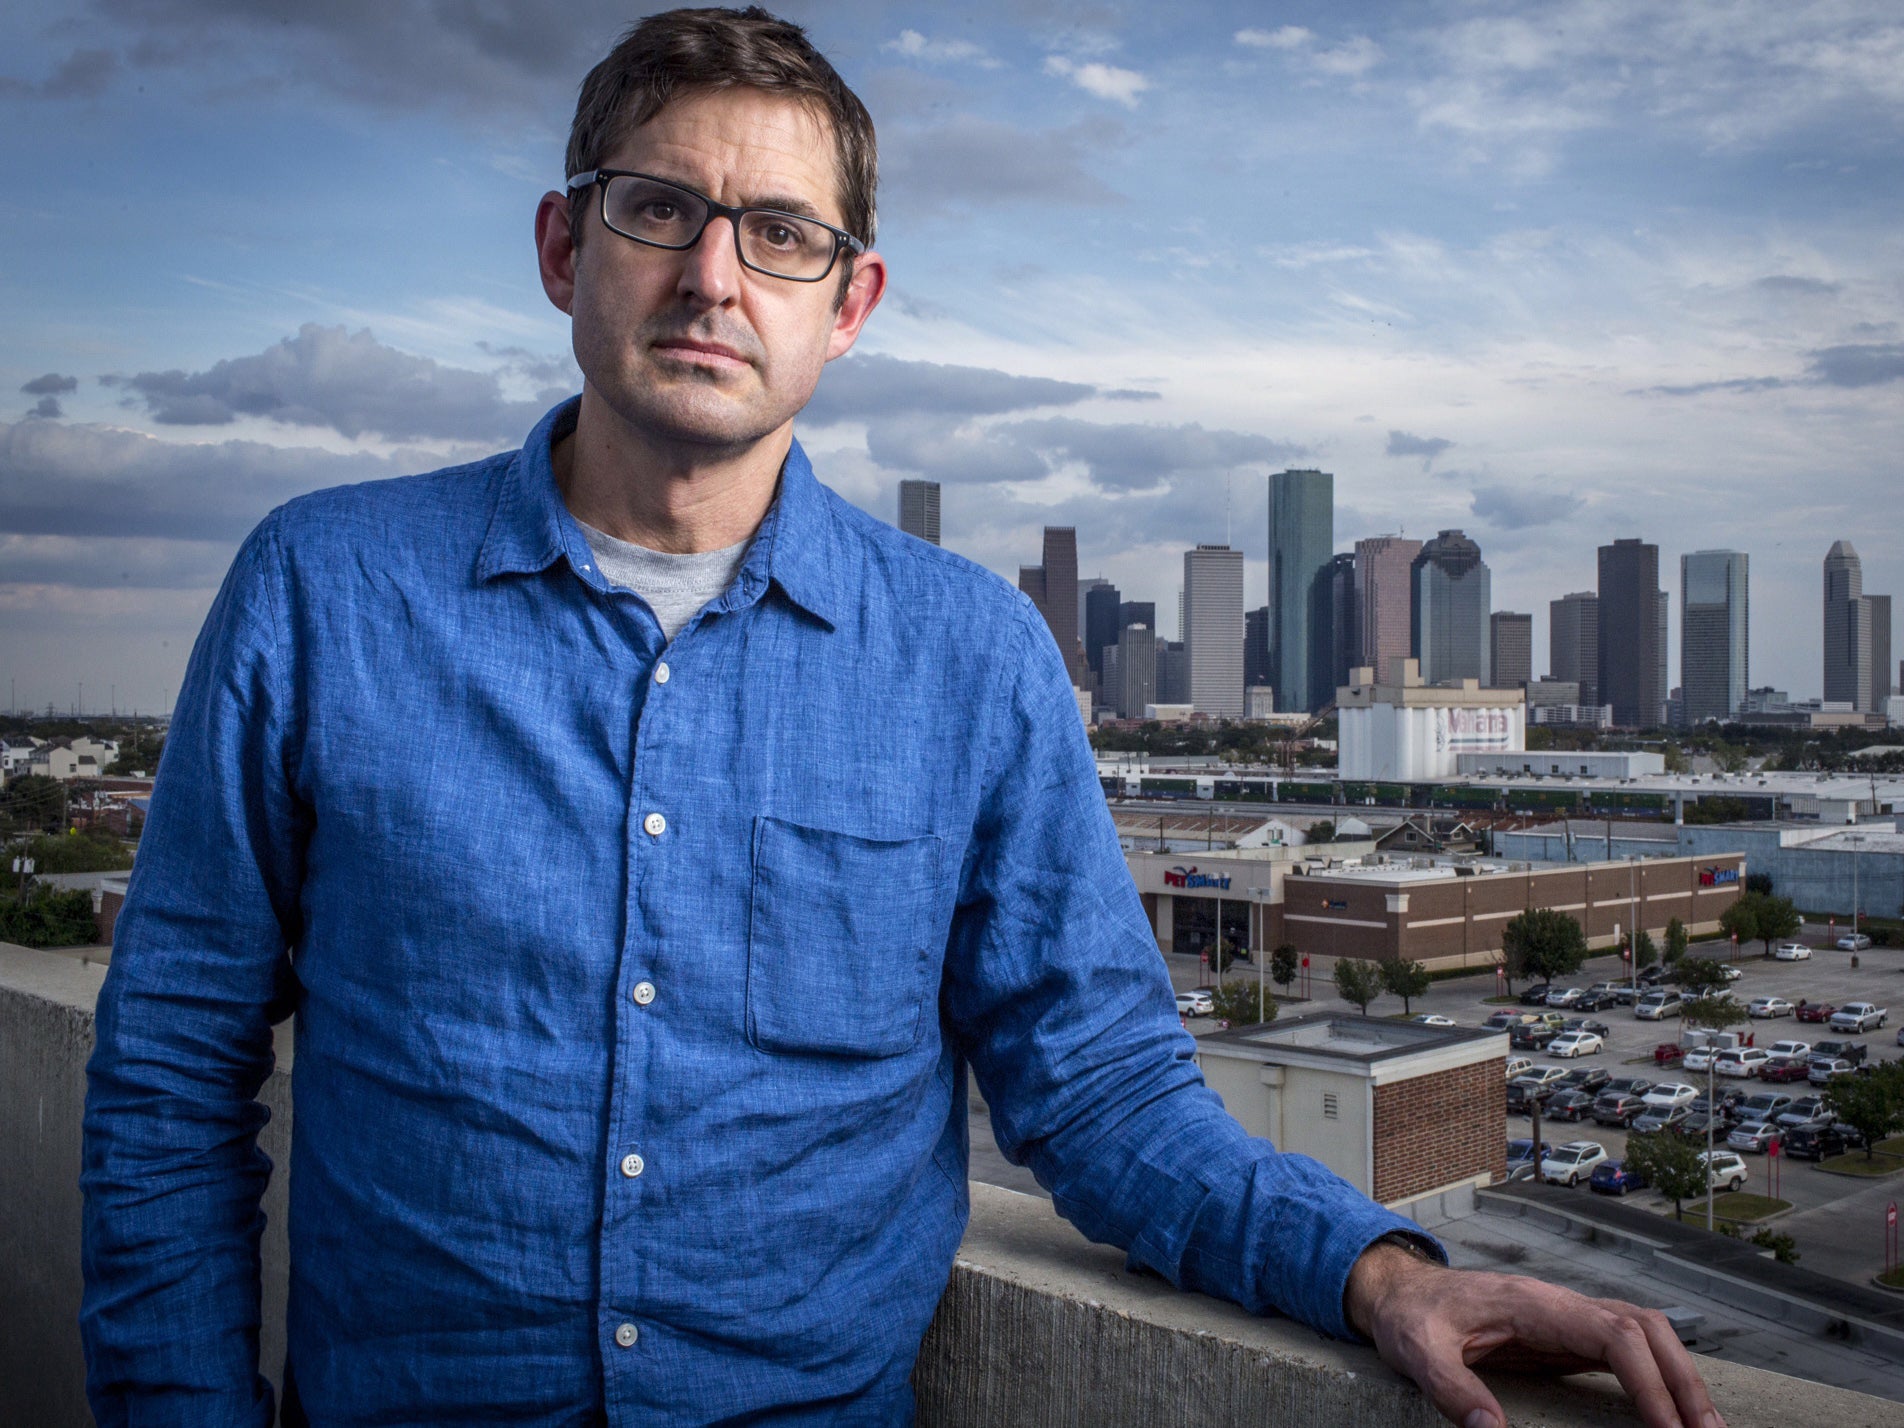 Theroux brings his familiar style on three under-covered aspects of US life